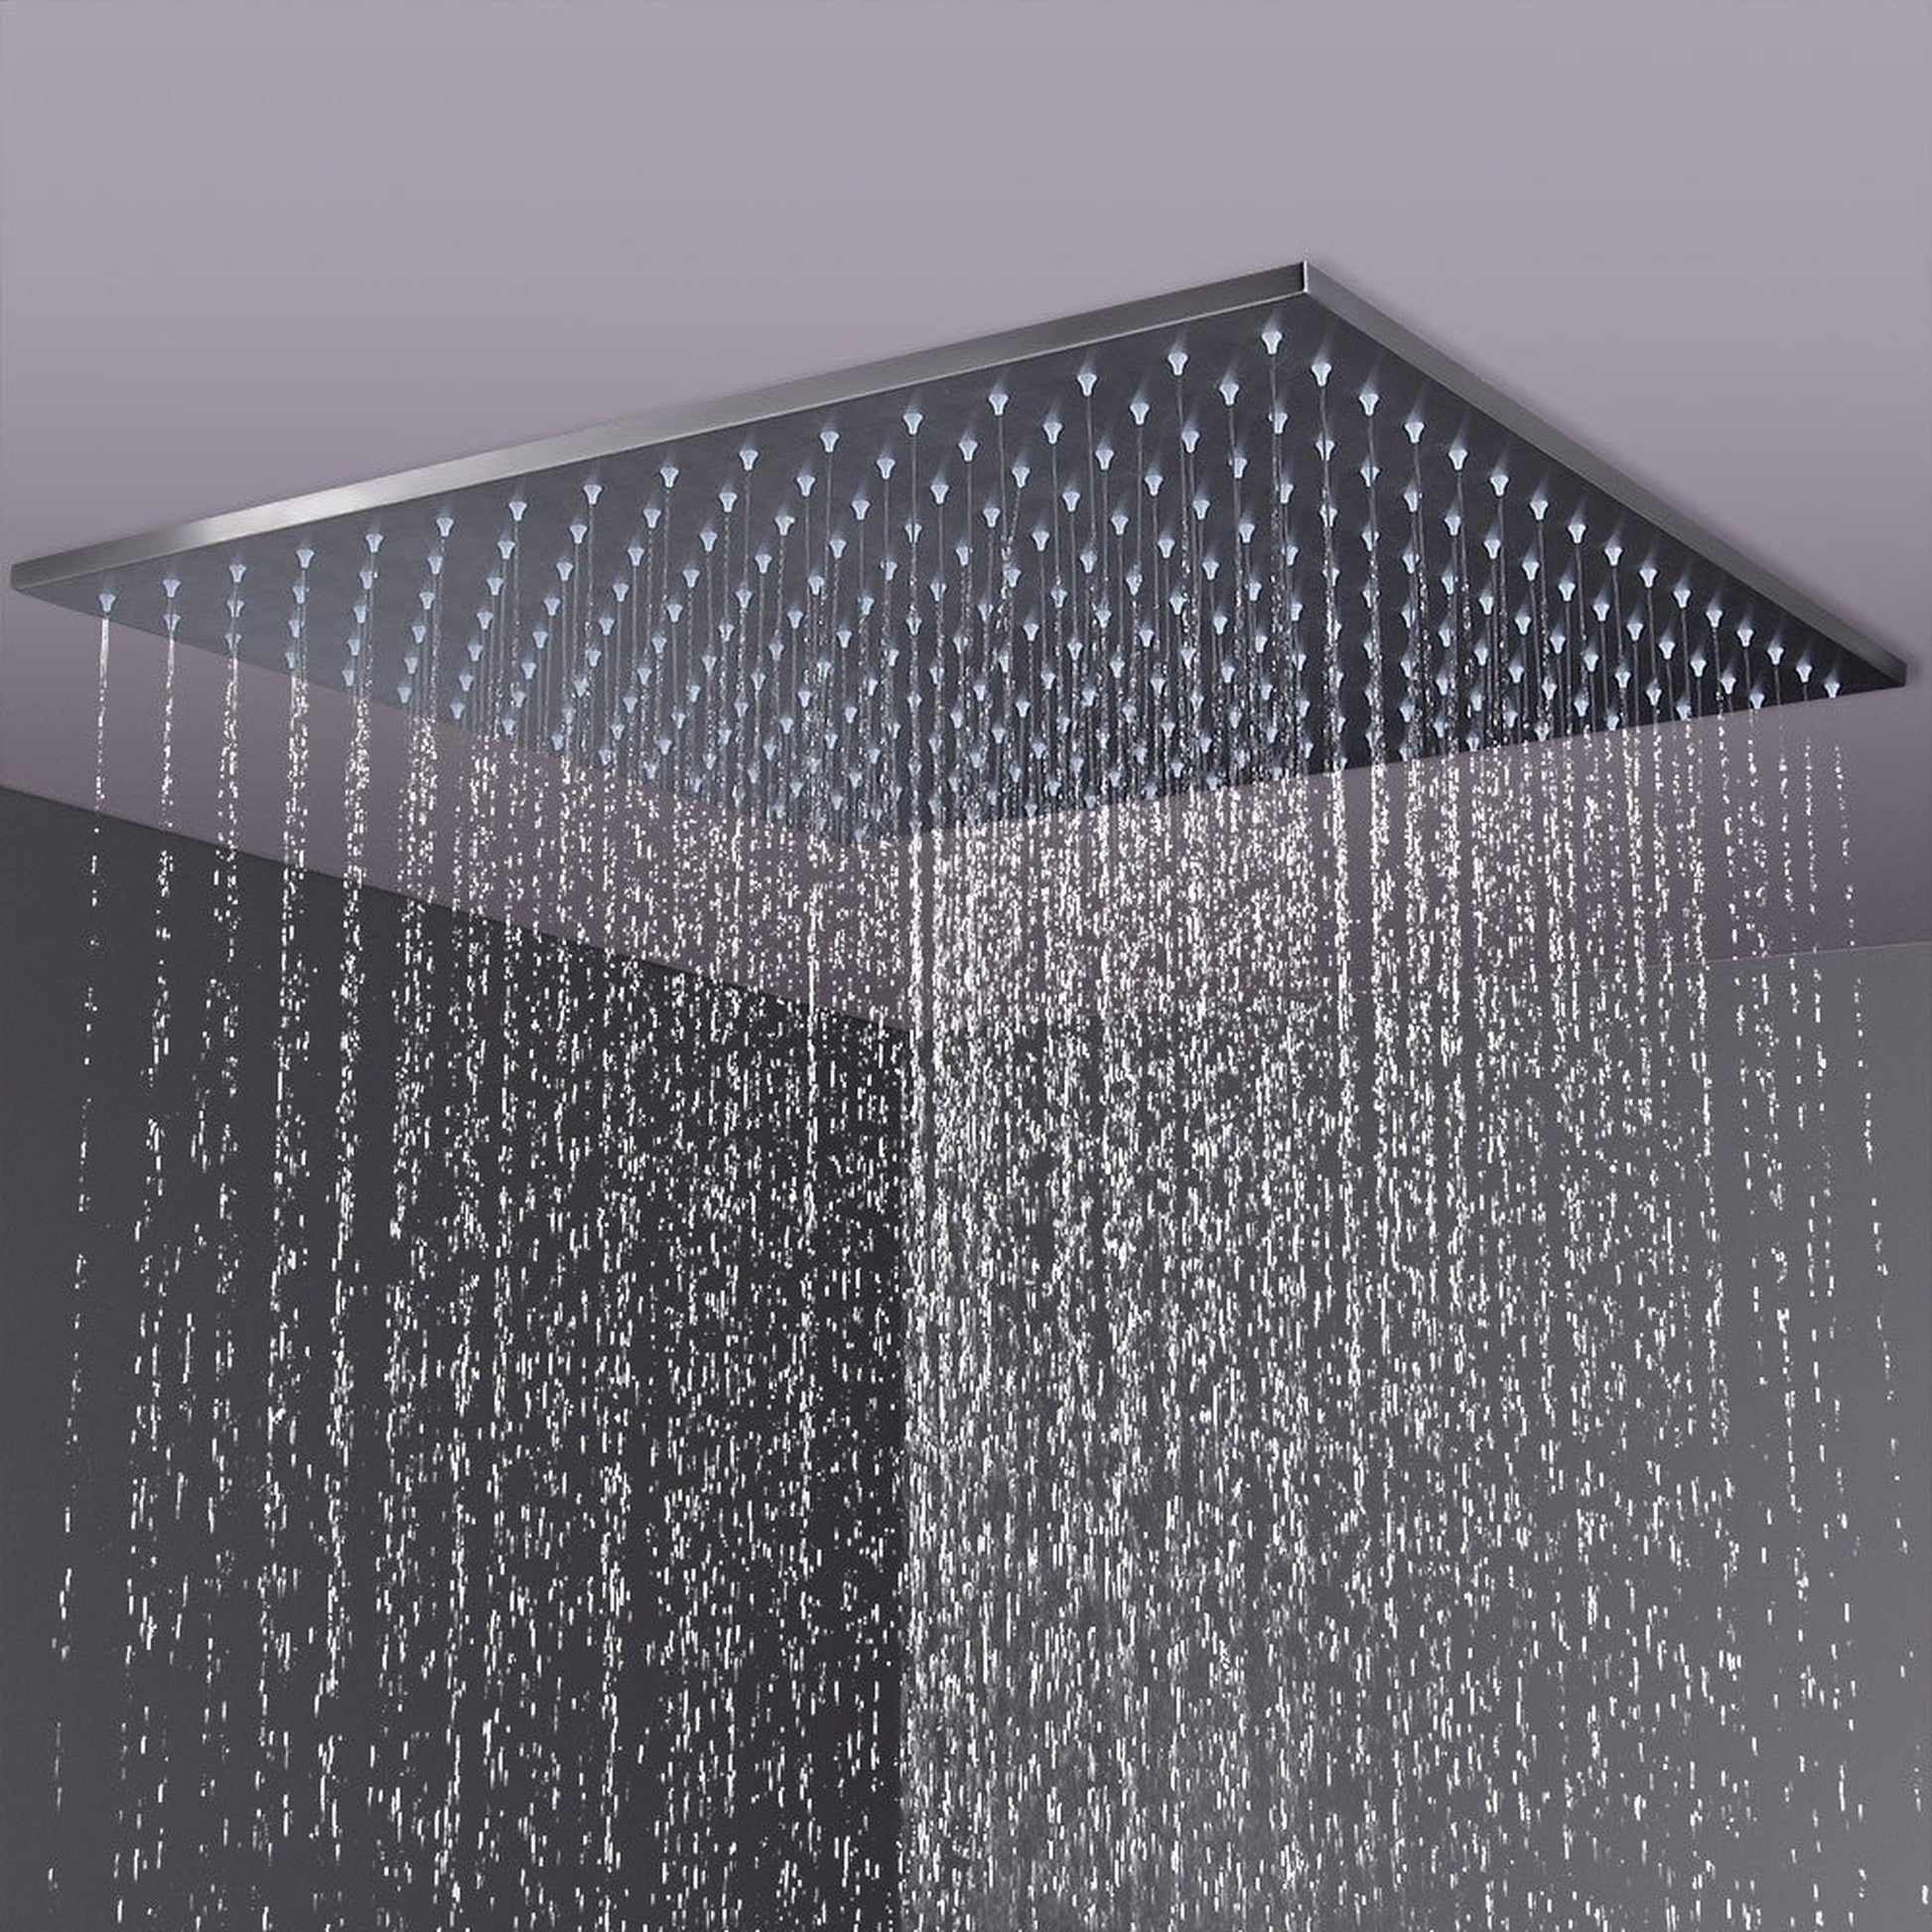 Fontana 40" x 40" Brushed Nickel Ceiling Mounted Thermostatic Valve Shower System With 3-Jet Sprays, Hand Shower and Without Water Powered LED Lights